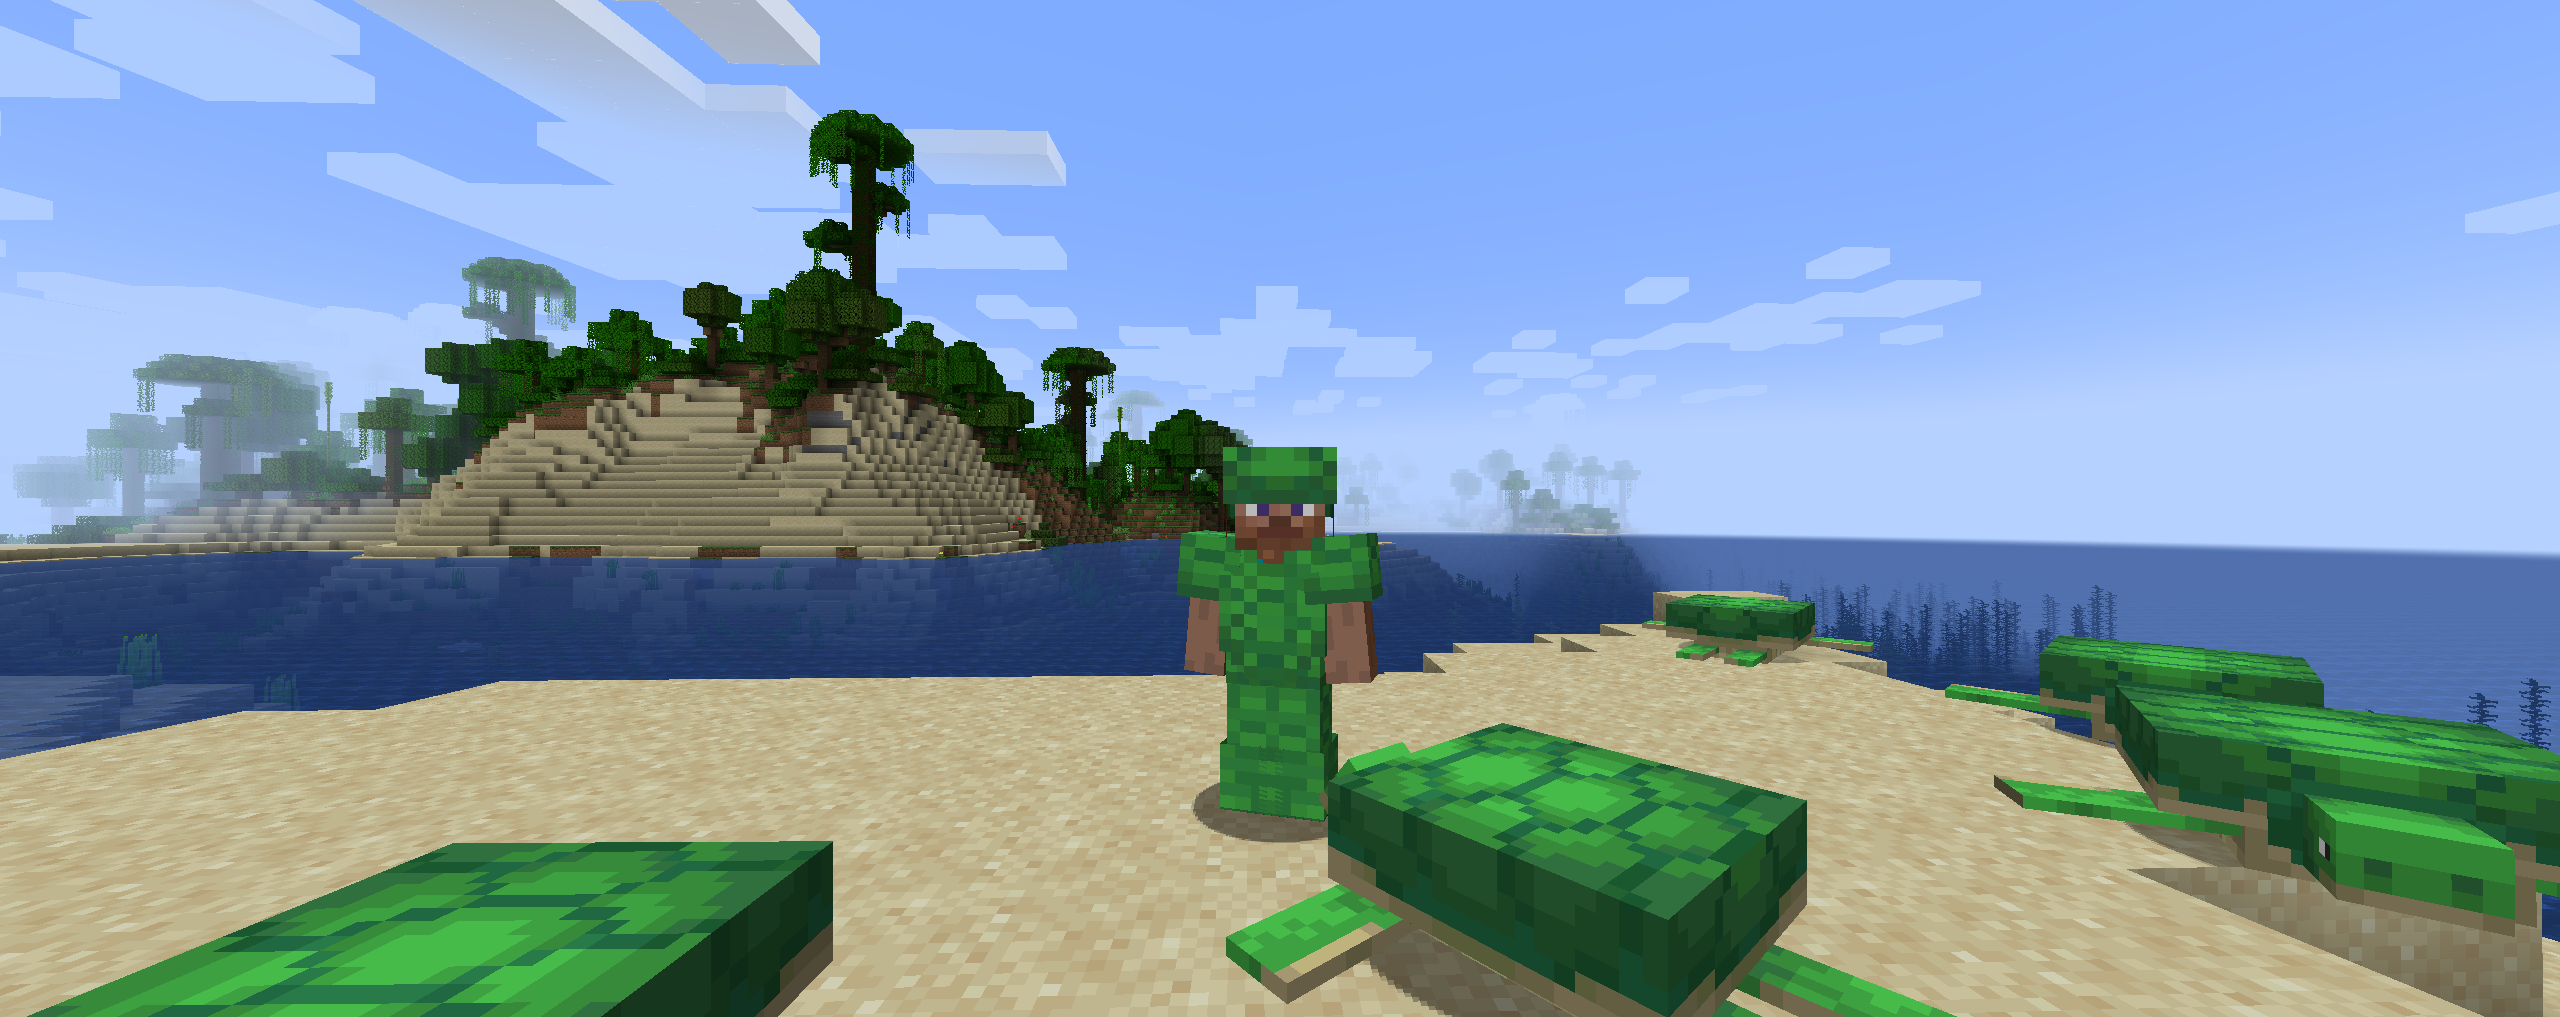 Turtle Armor With Turtles On A Beach